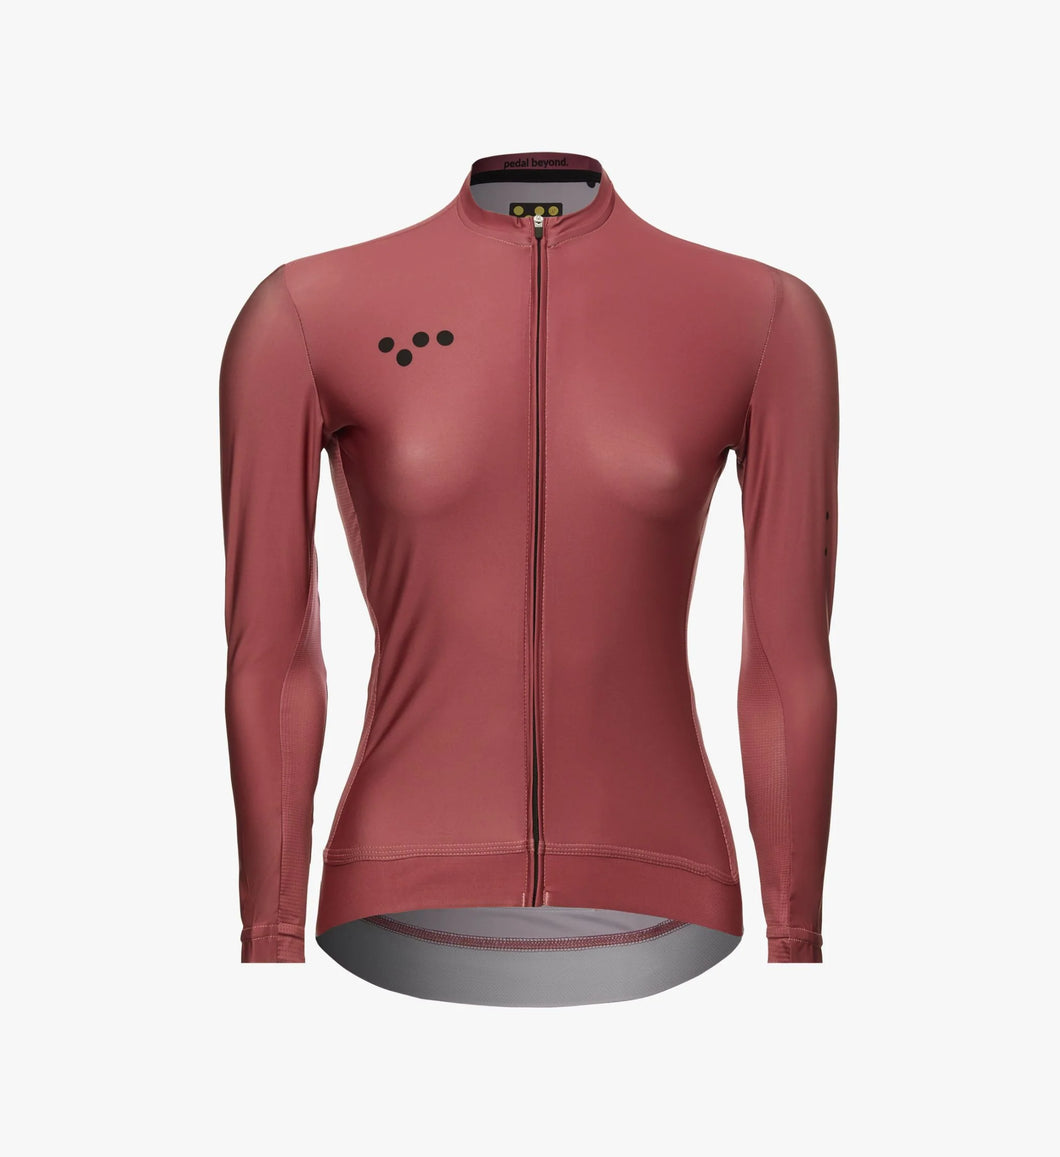 Essentials / Women's Classic L/S Jersey - Mineral Red